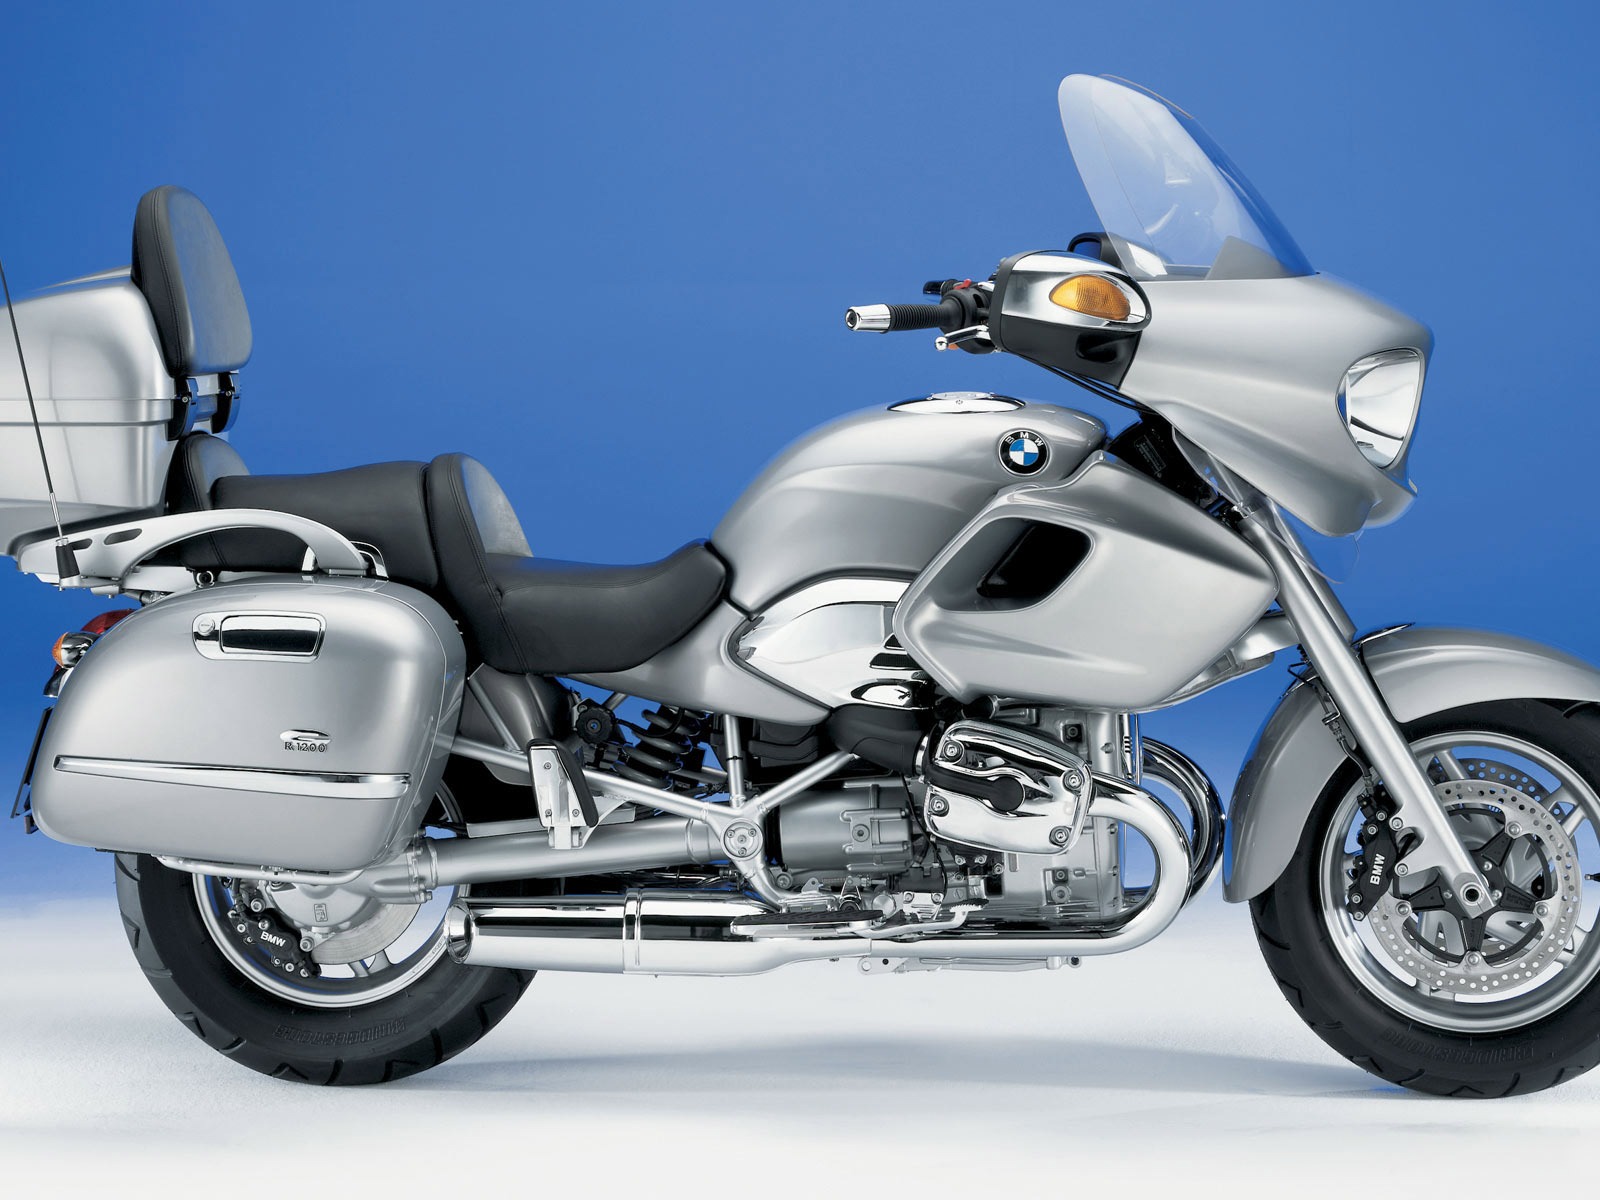 BMW motorcycle wallpapers (2) #20 - 1600x1200